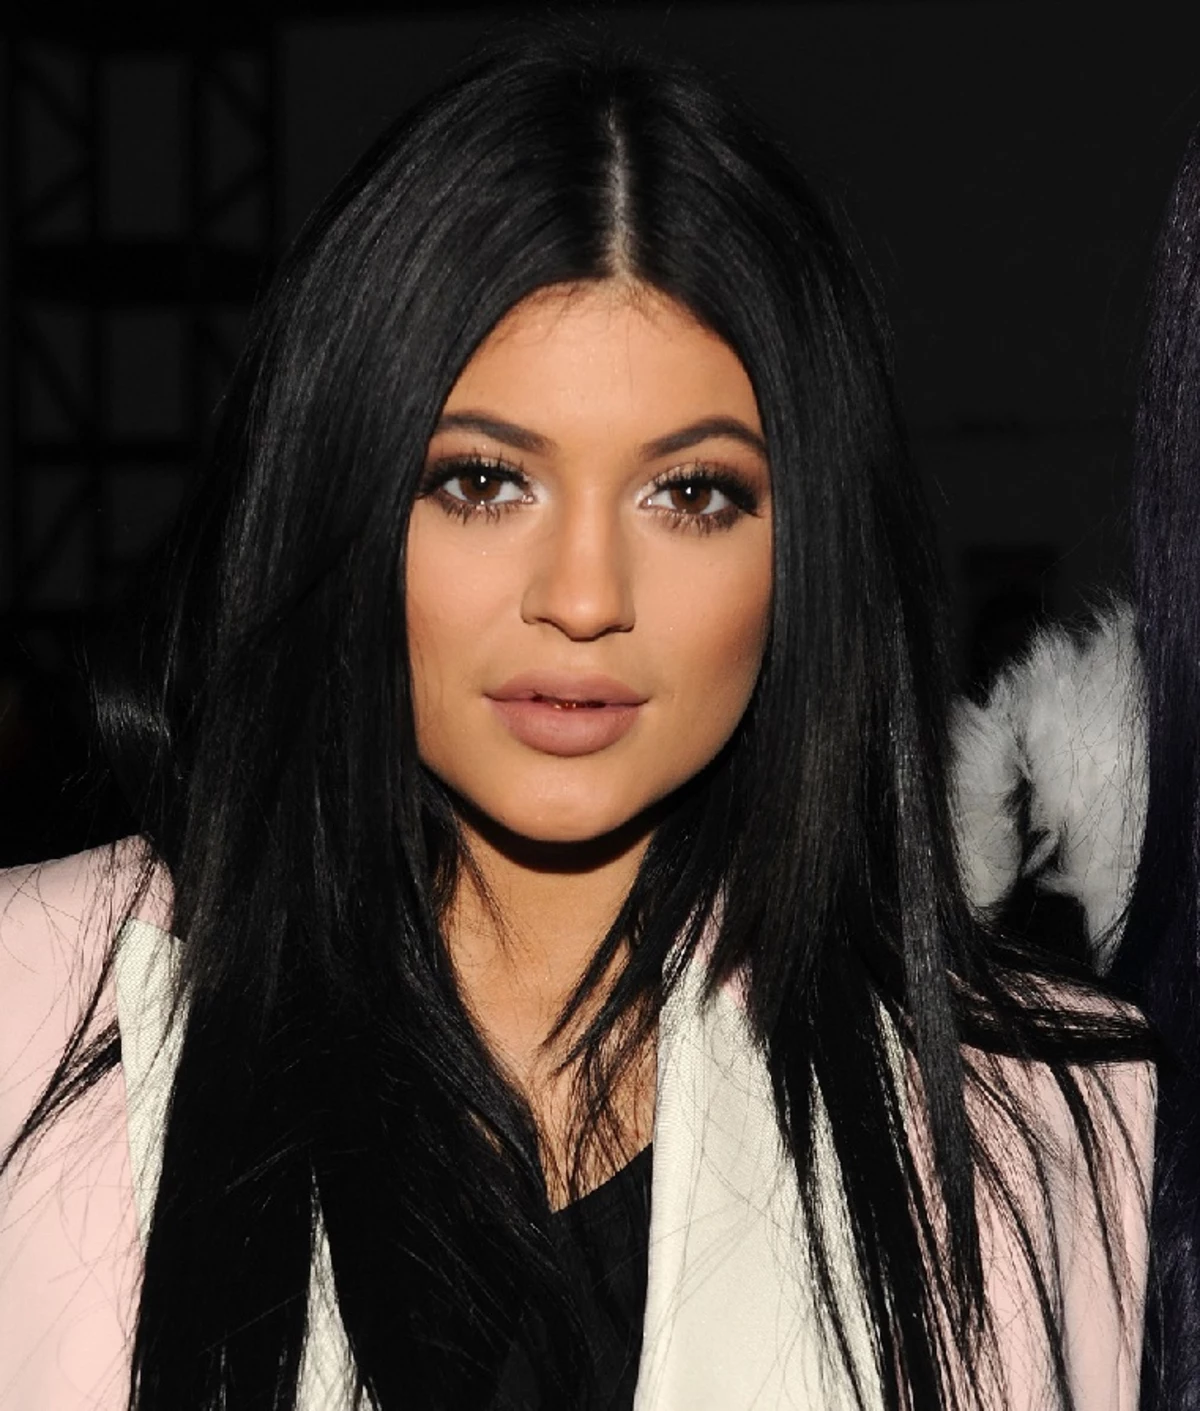 Kylie Jenner Challenge is the Latest Dumb Internet Trend